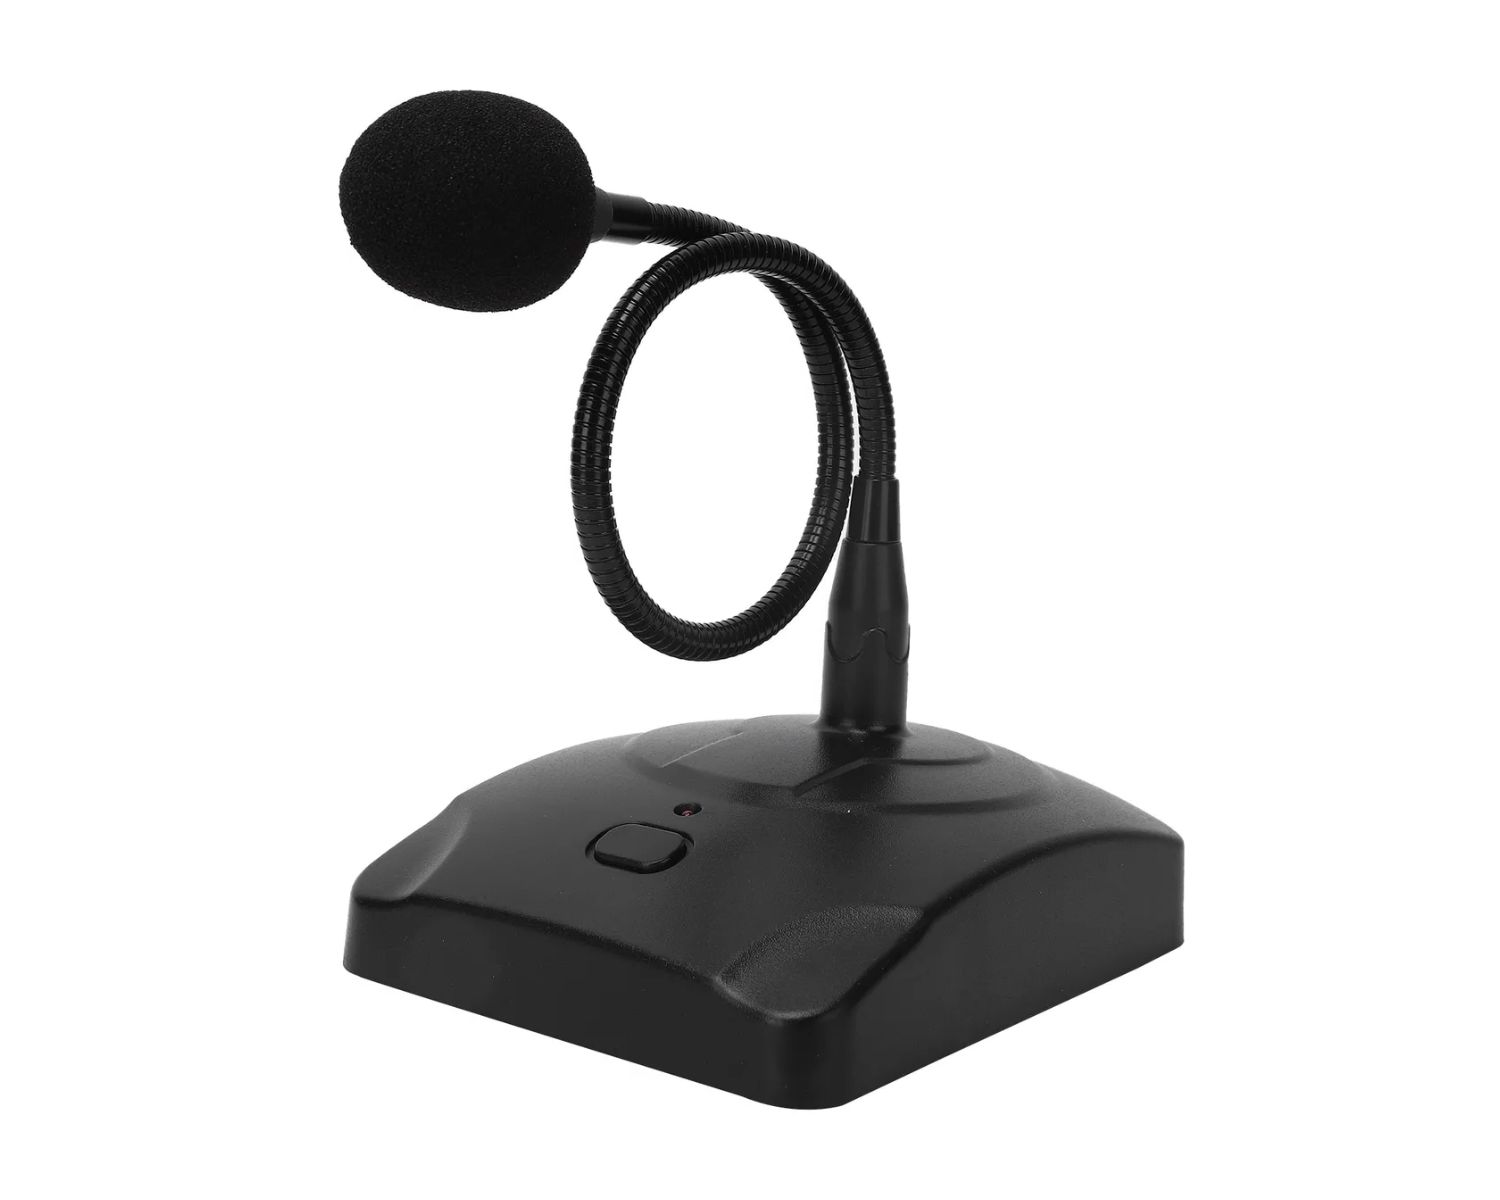 Top Desktop Microphone Review: Find the Perfect Mic for Your Needs